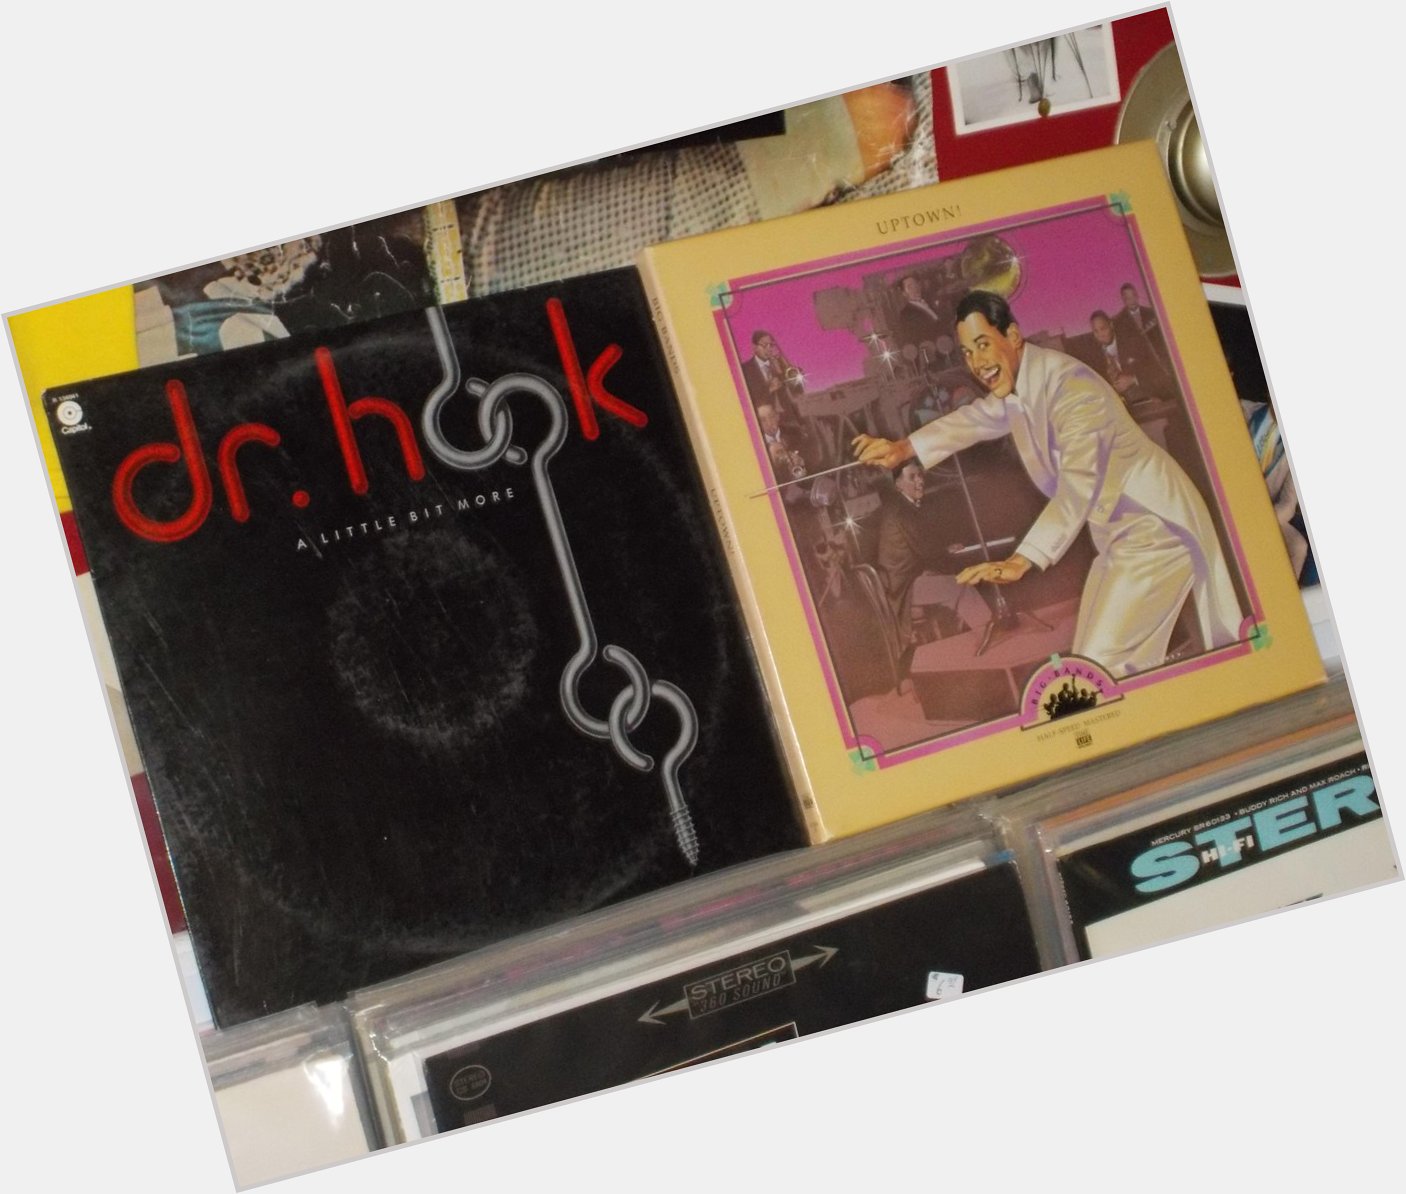 Happy Birthday to Dennis Locorriere of Dr. Hook and the late Doc Cheatam, who played with Cab Callaway (and his own) 